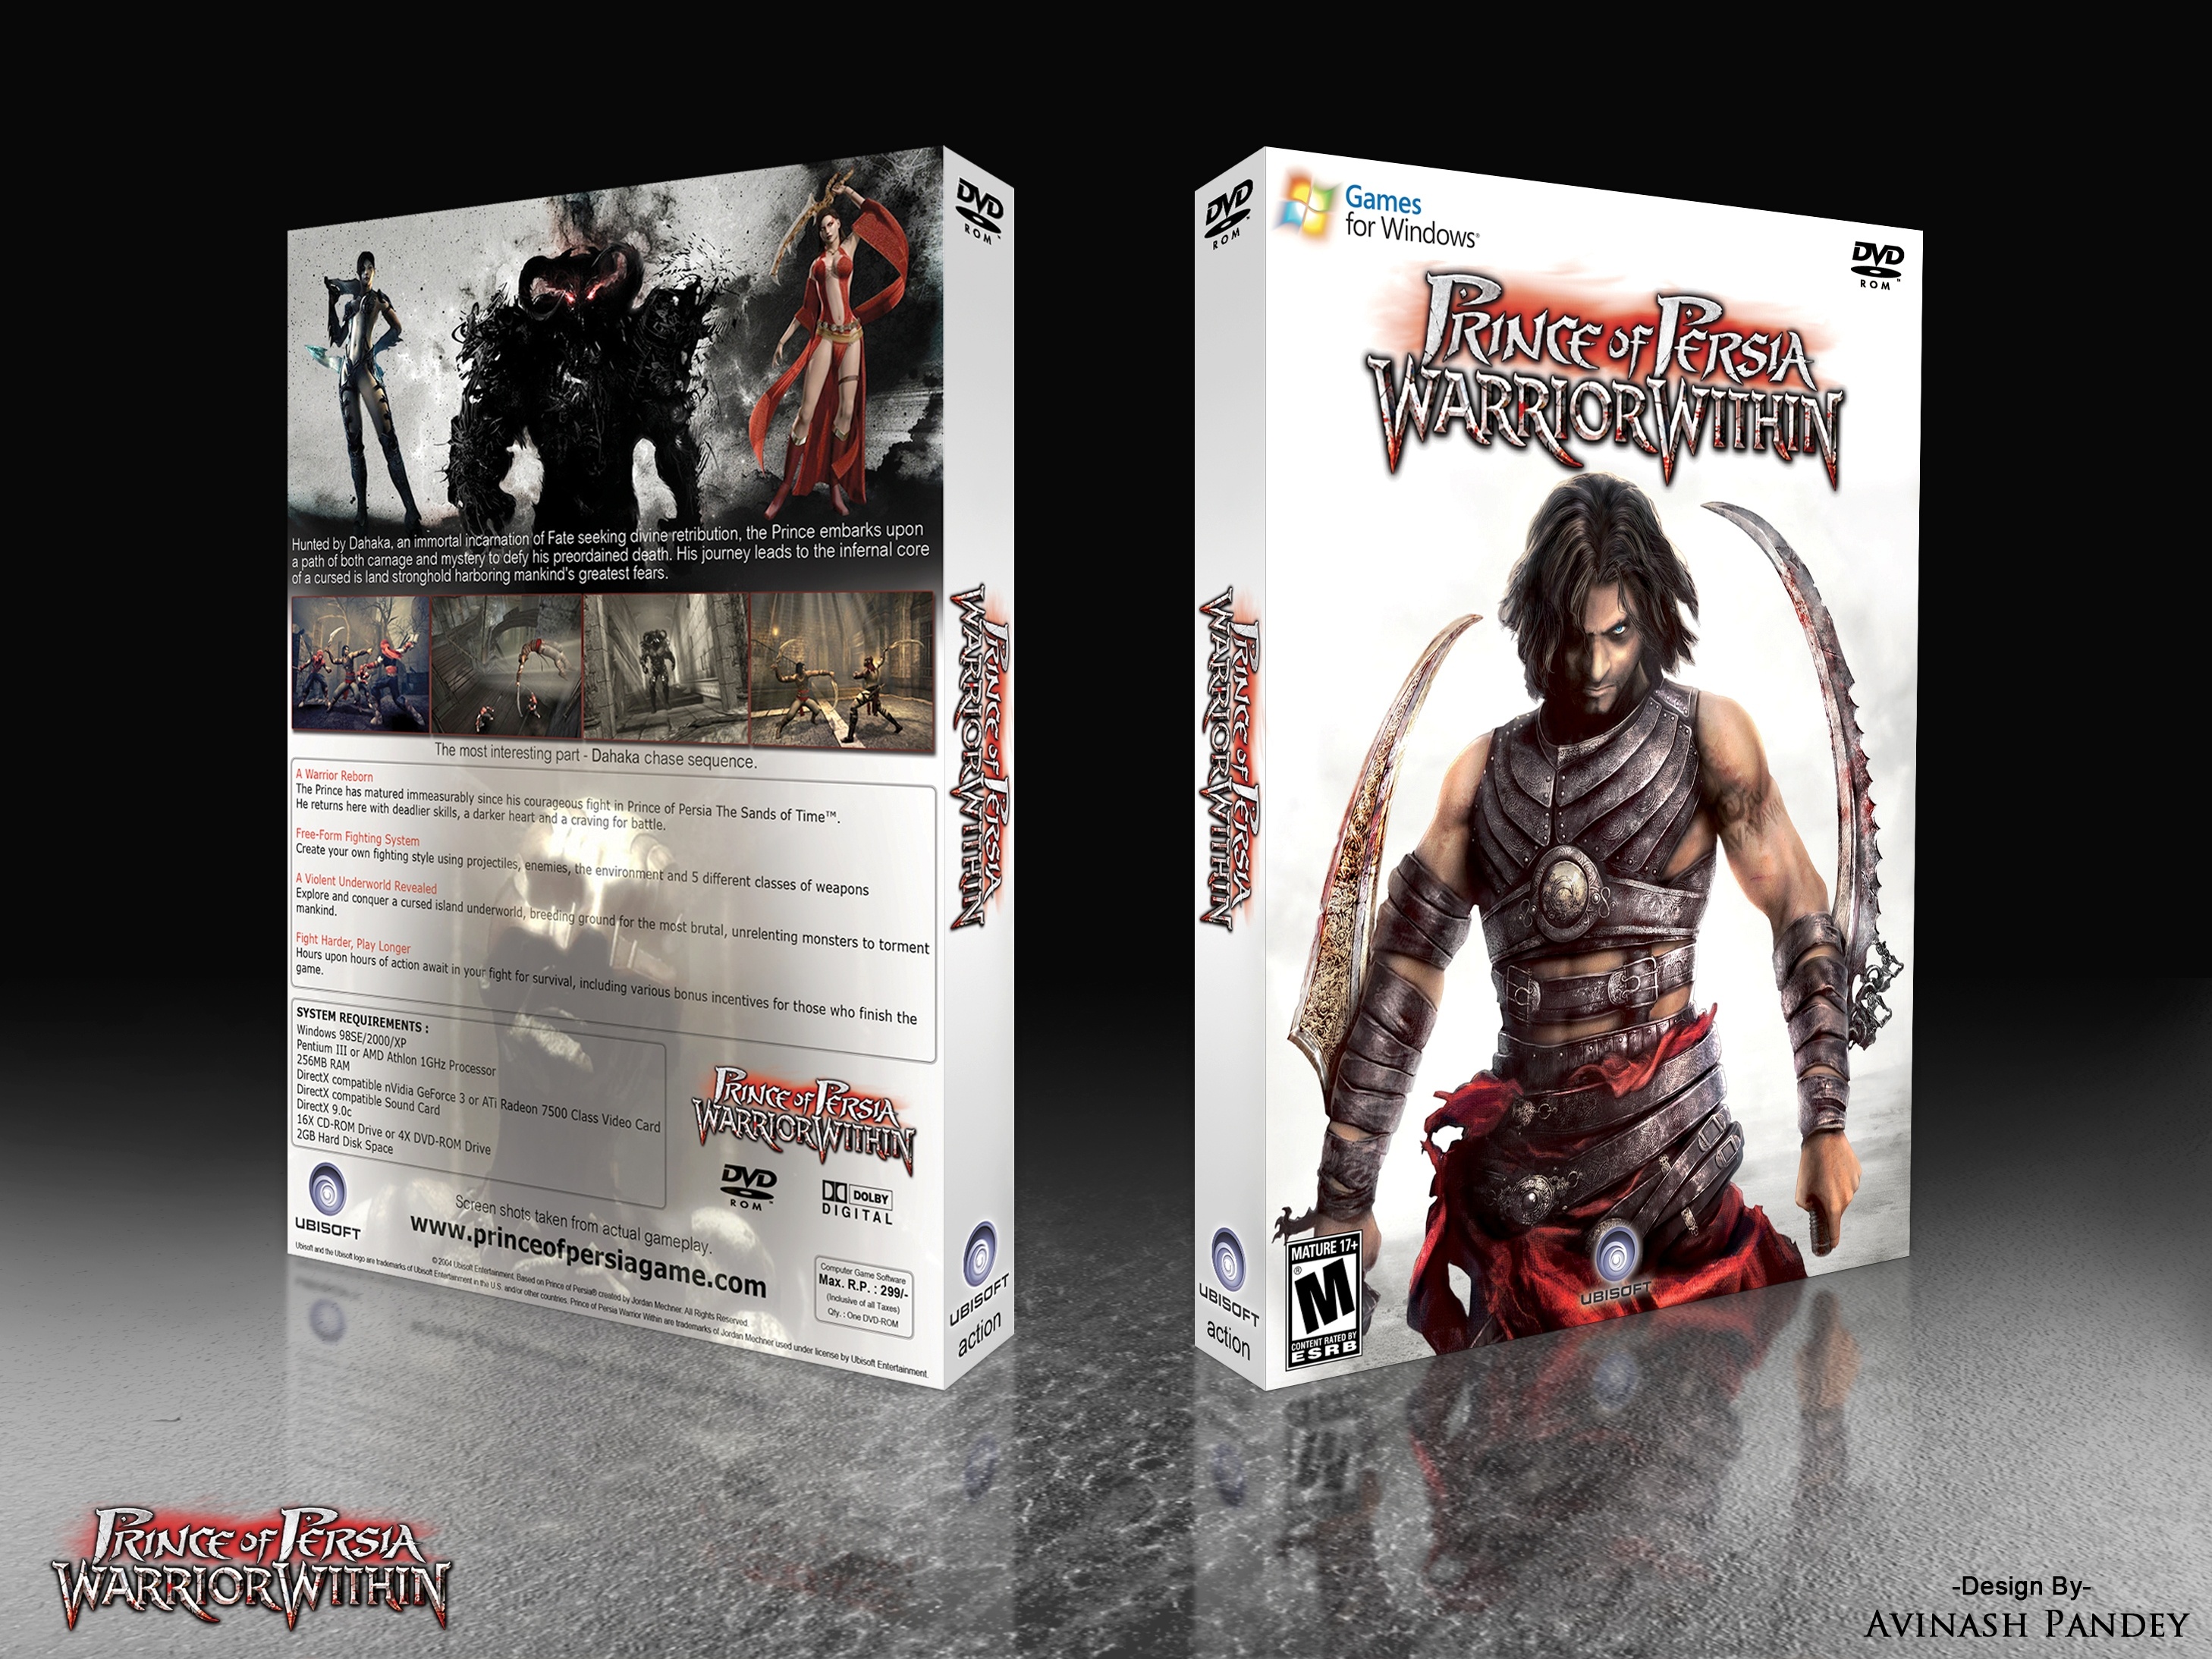 Prince of Persia Warrior Within box cover